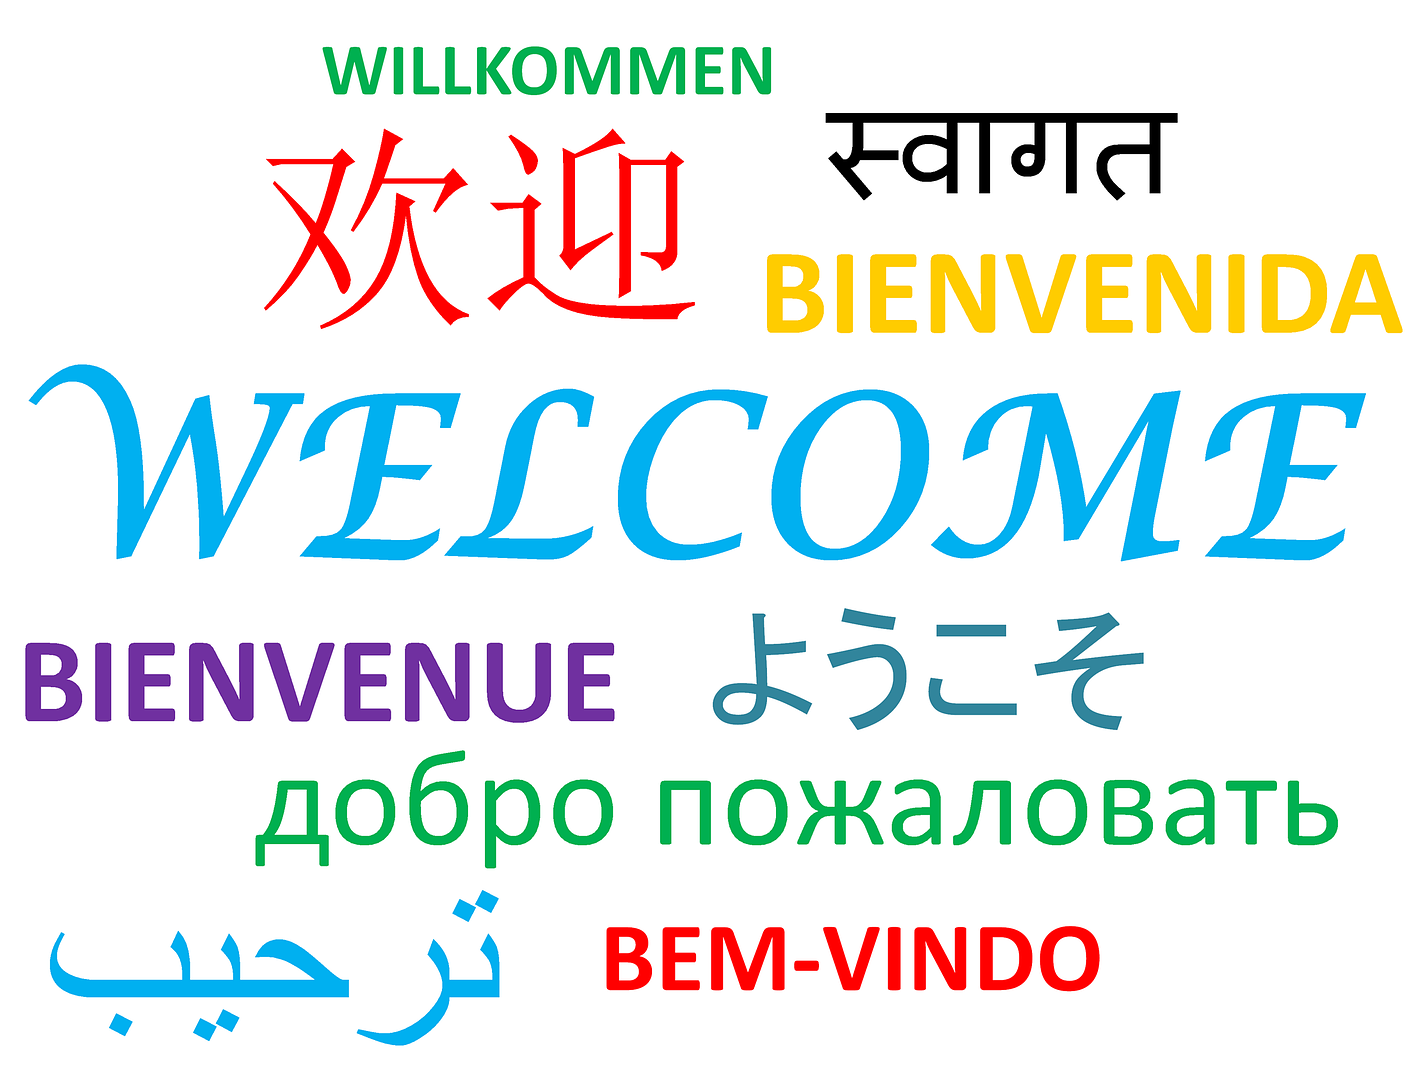 "Welcome" in different languages